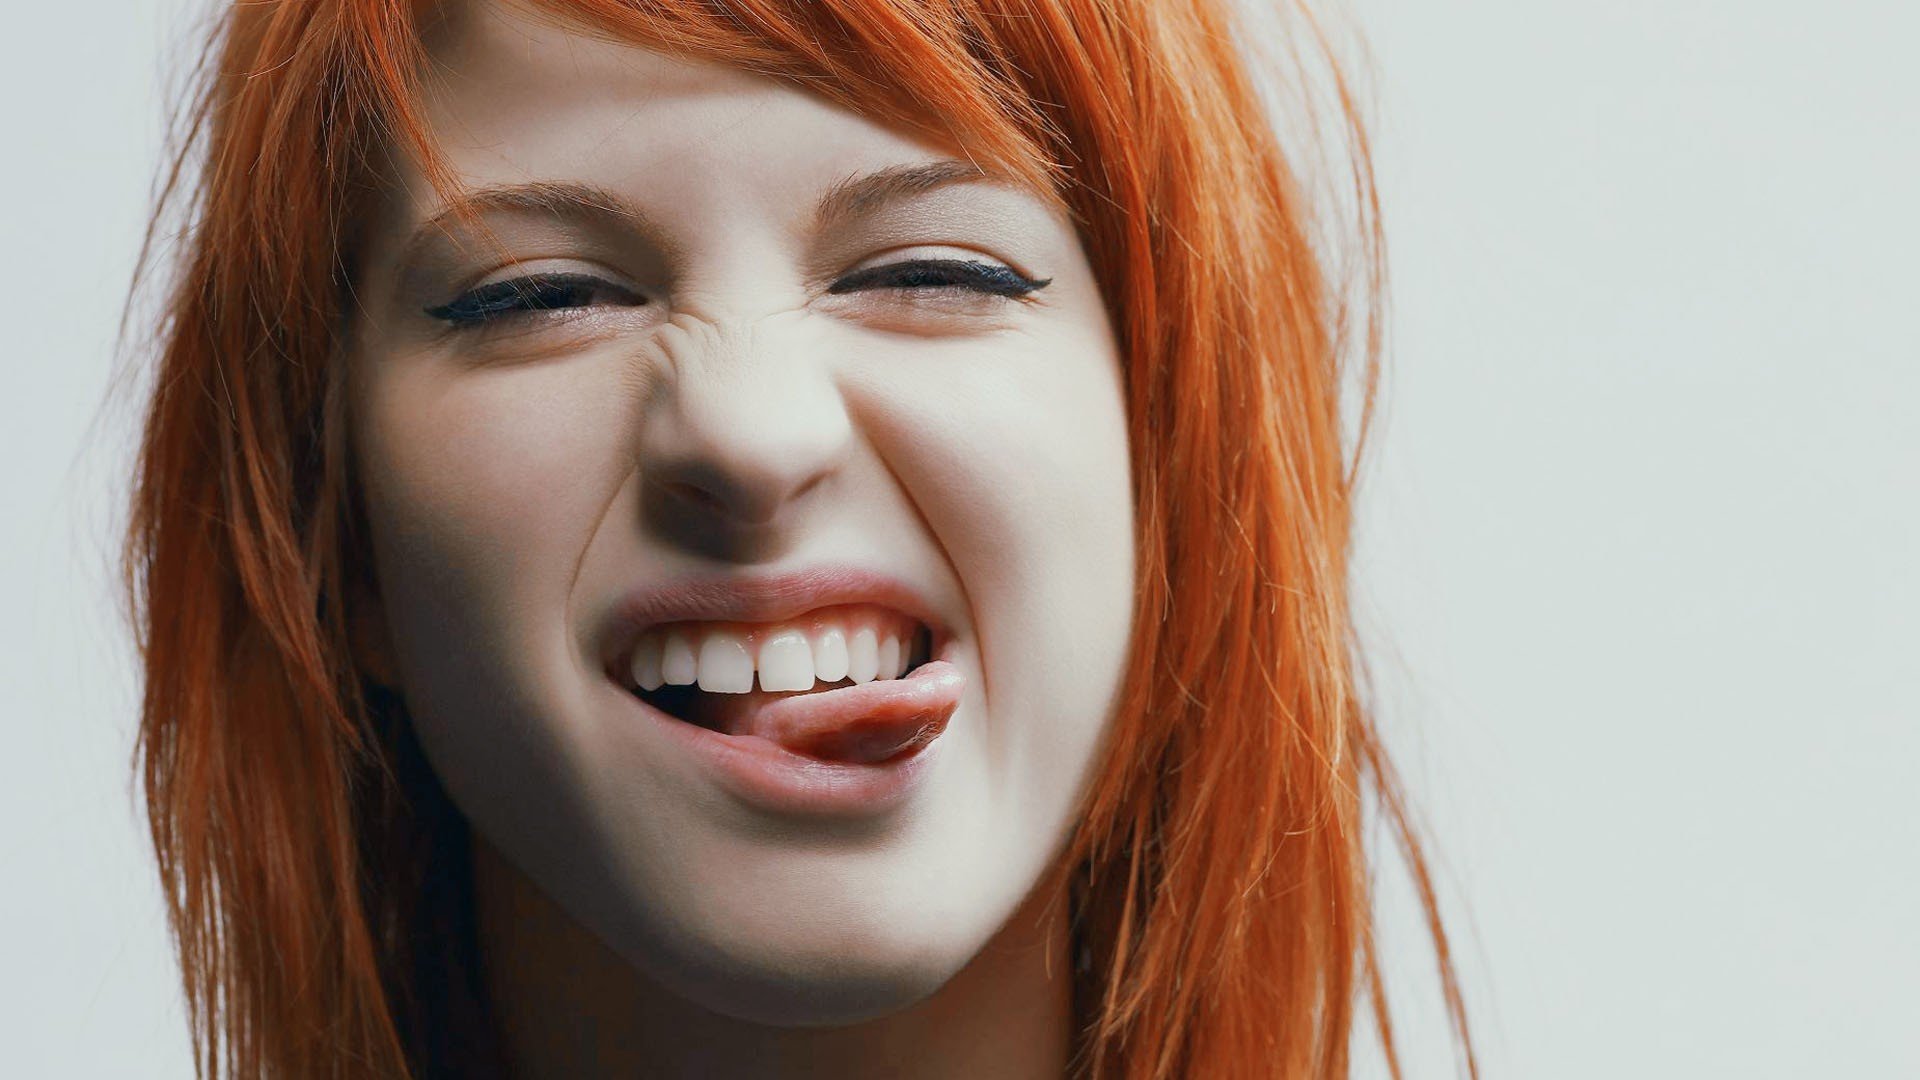 Hayley Williams Paramore Women Music Redheads Pop Emo Tongue Singers